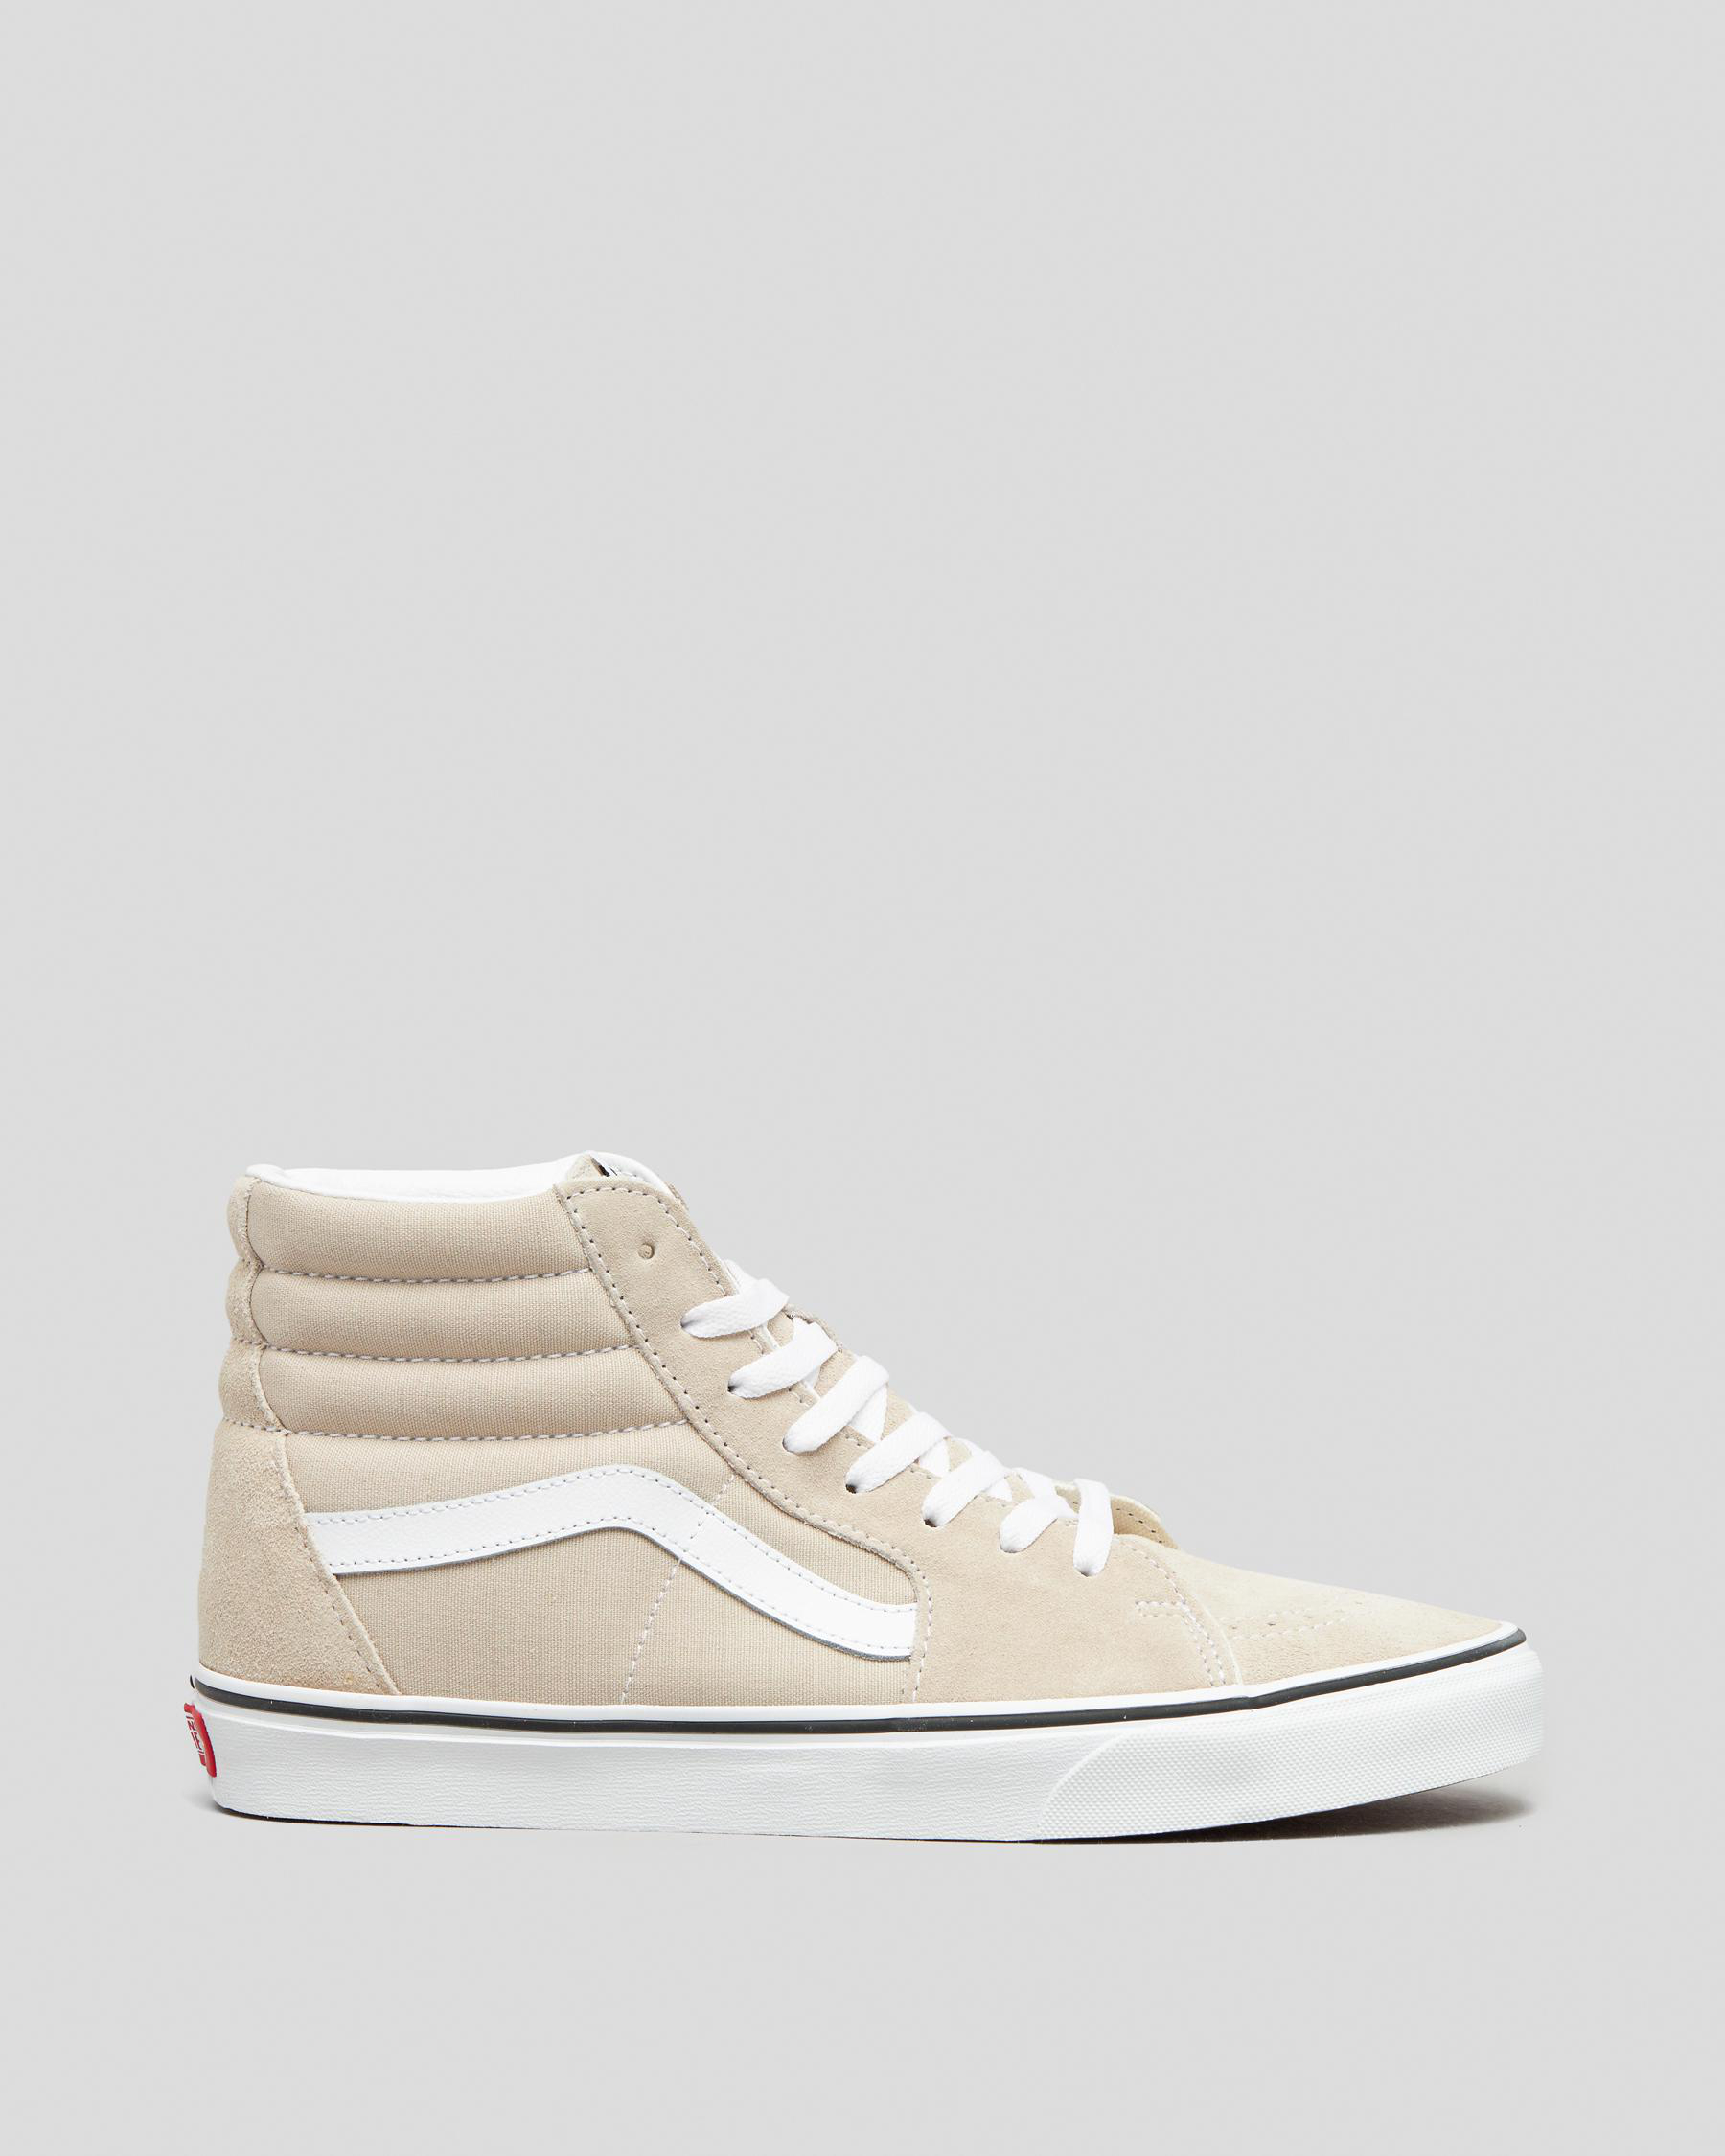 Shop Vans Sk8-Hi Shoes In Colour Theory French Oak - Fast Shipping ...